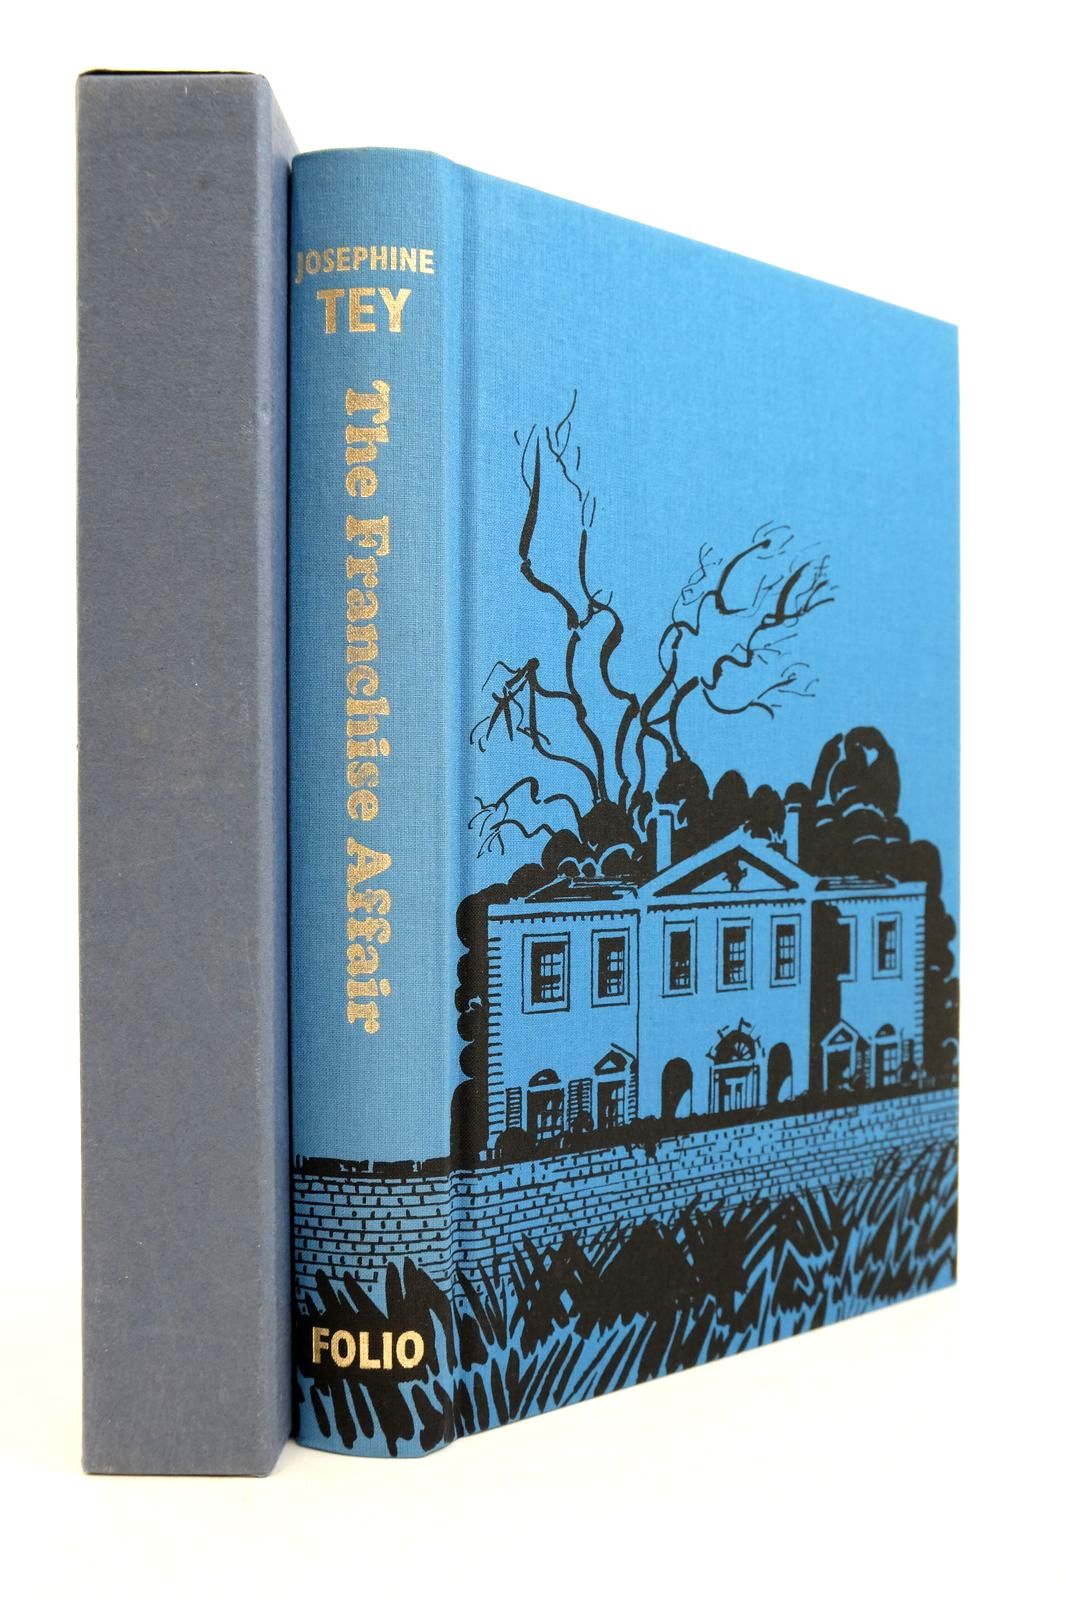 Photo of THE FRANCHISE AFFAIR written by Tey, Josephine
Fraser, Antonia illustrated by Hogarth, Paul published by Folio Society (STOCK CODE: 2139496)  for sale by Stella & Rose's Books